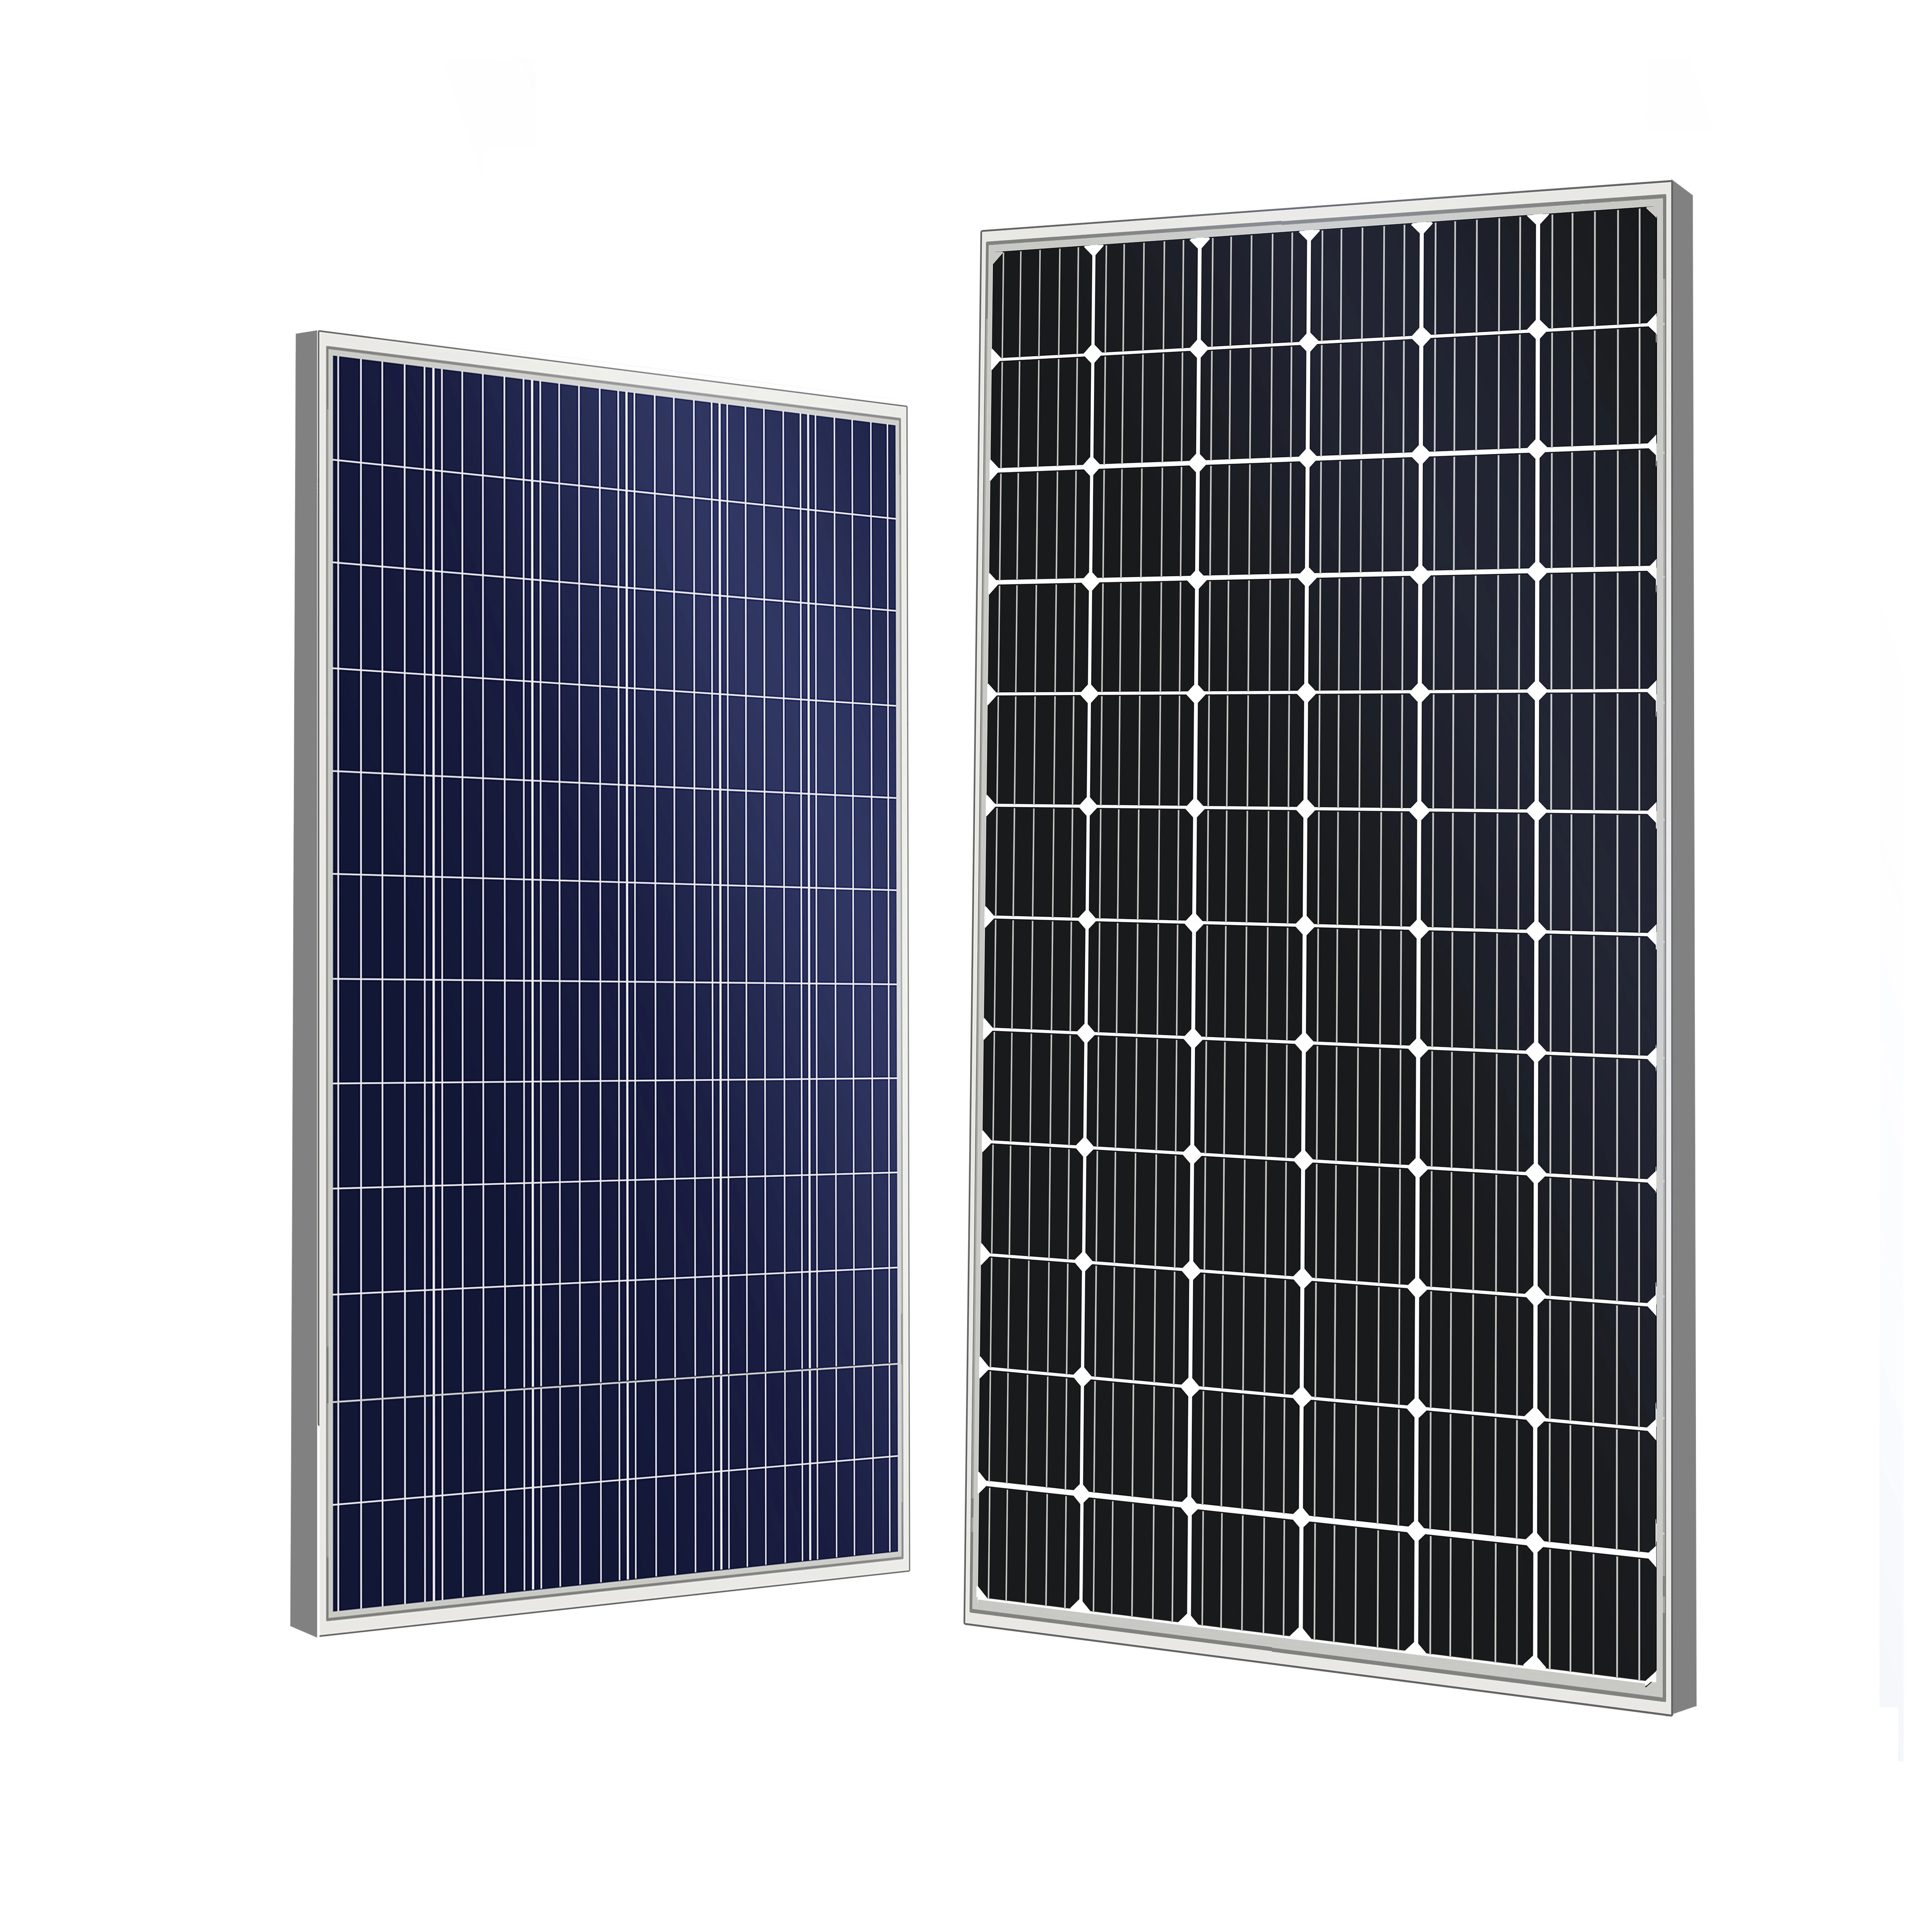 solar products of 30KW 30000W soler panel system home and solar panel kit for home